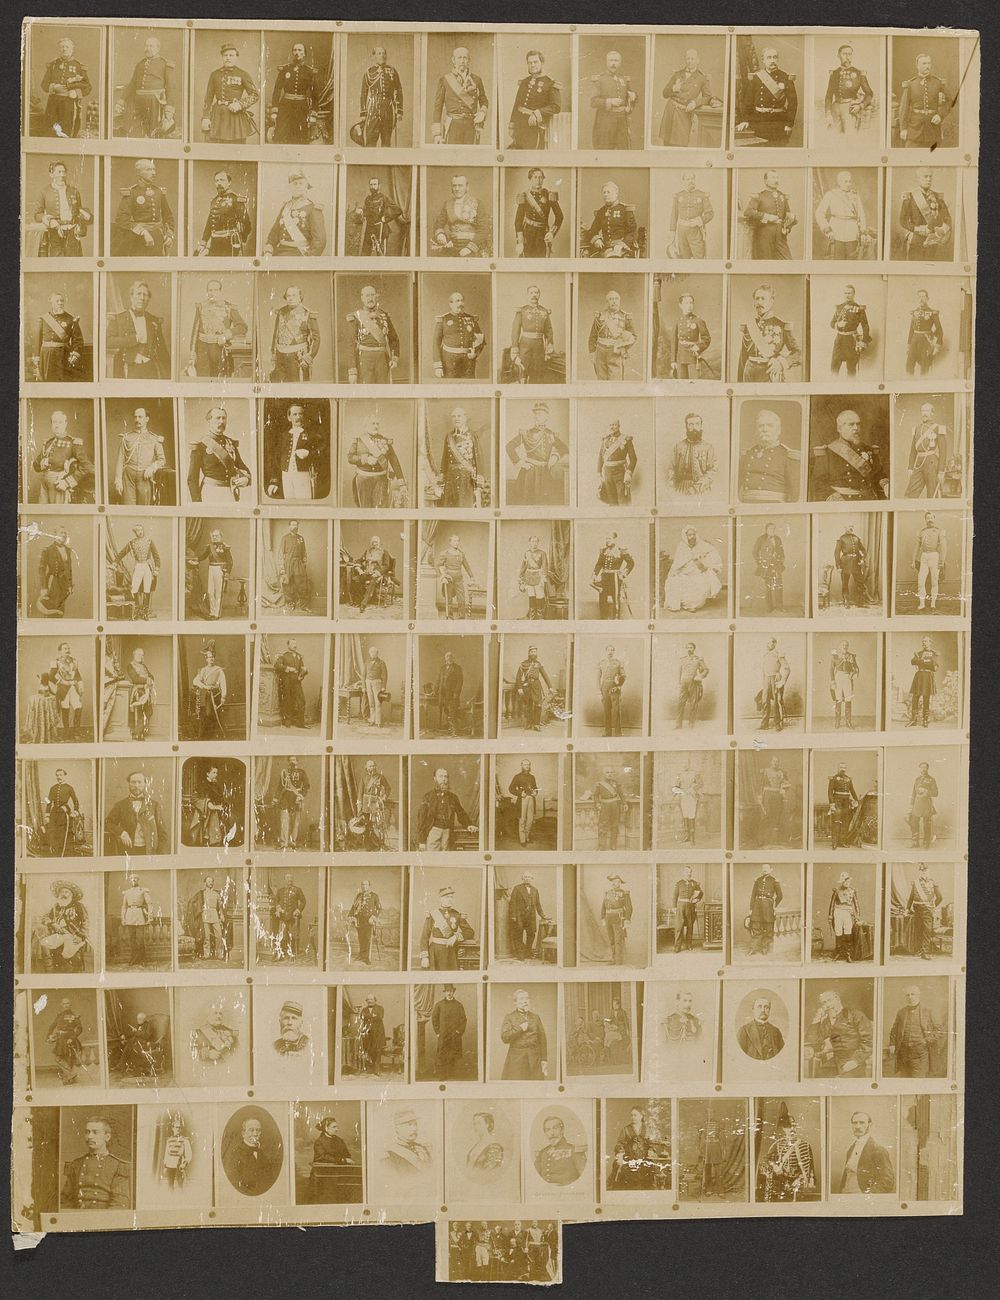 Photographer's portrait inventory sheet of Camp de Châlons military personnel by Gustave Le Gray